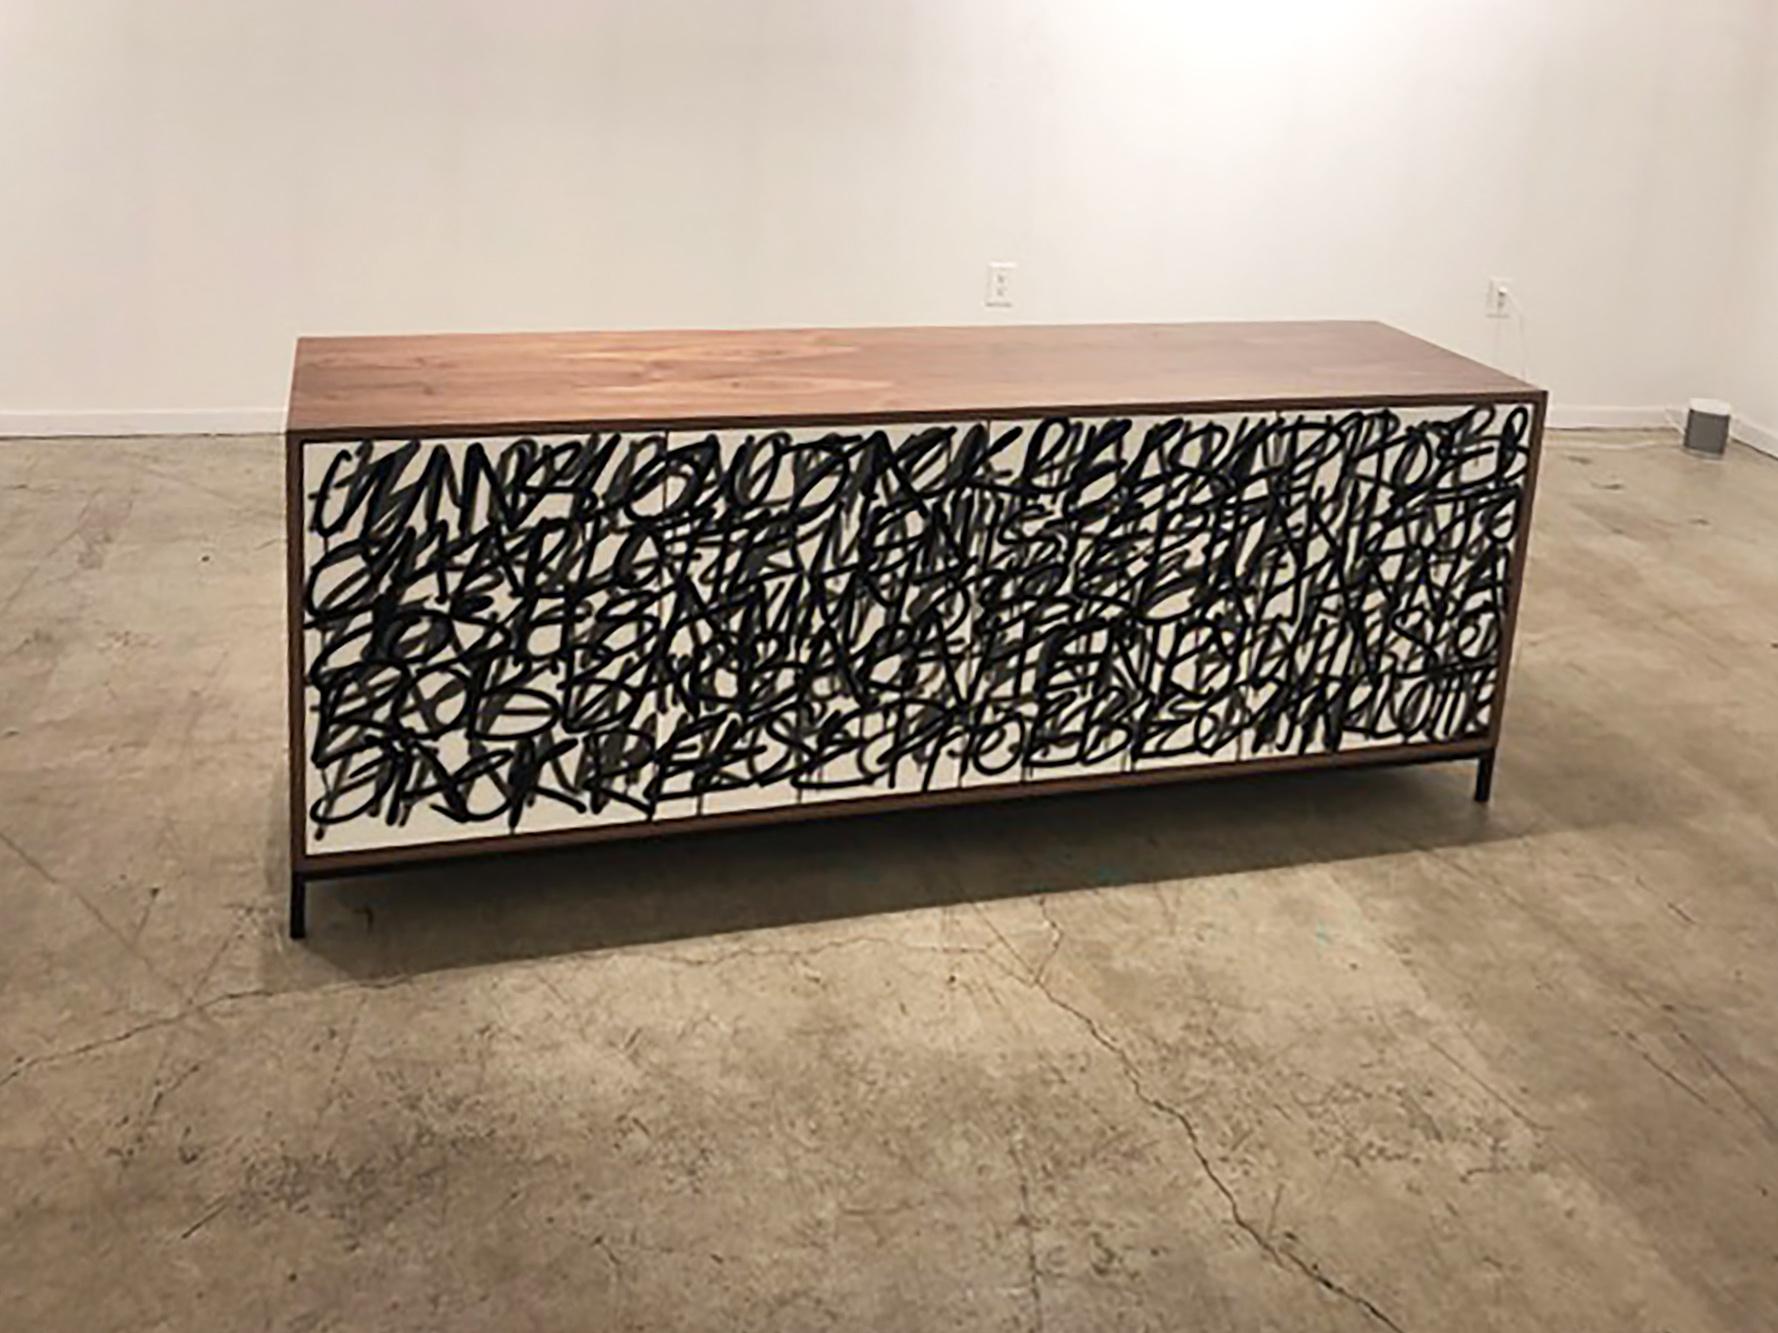 Modern Say It Again graffiti credenza by Morgan Clayhall, mix media artwork on doors For Sale